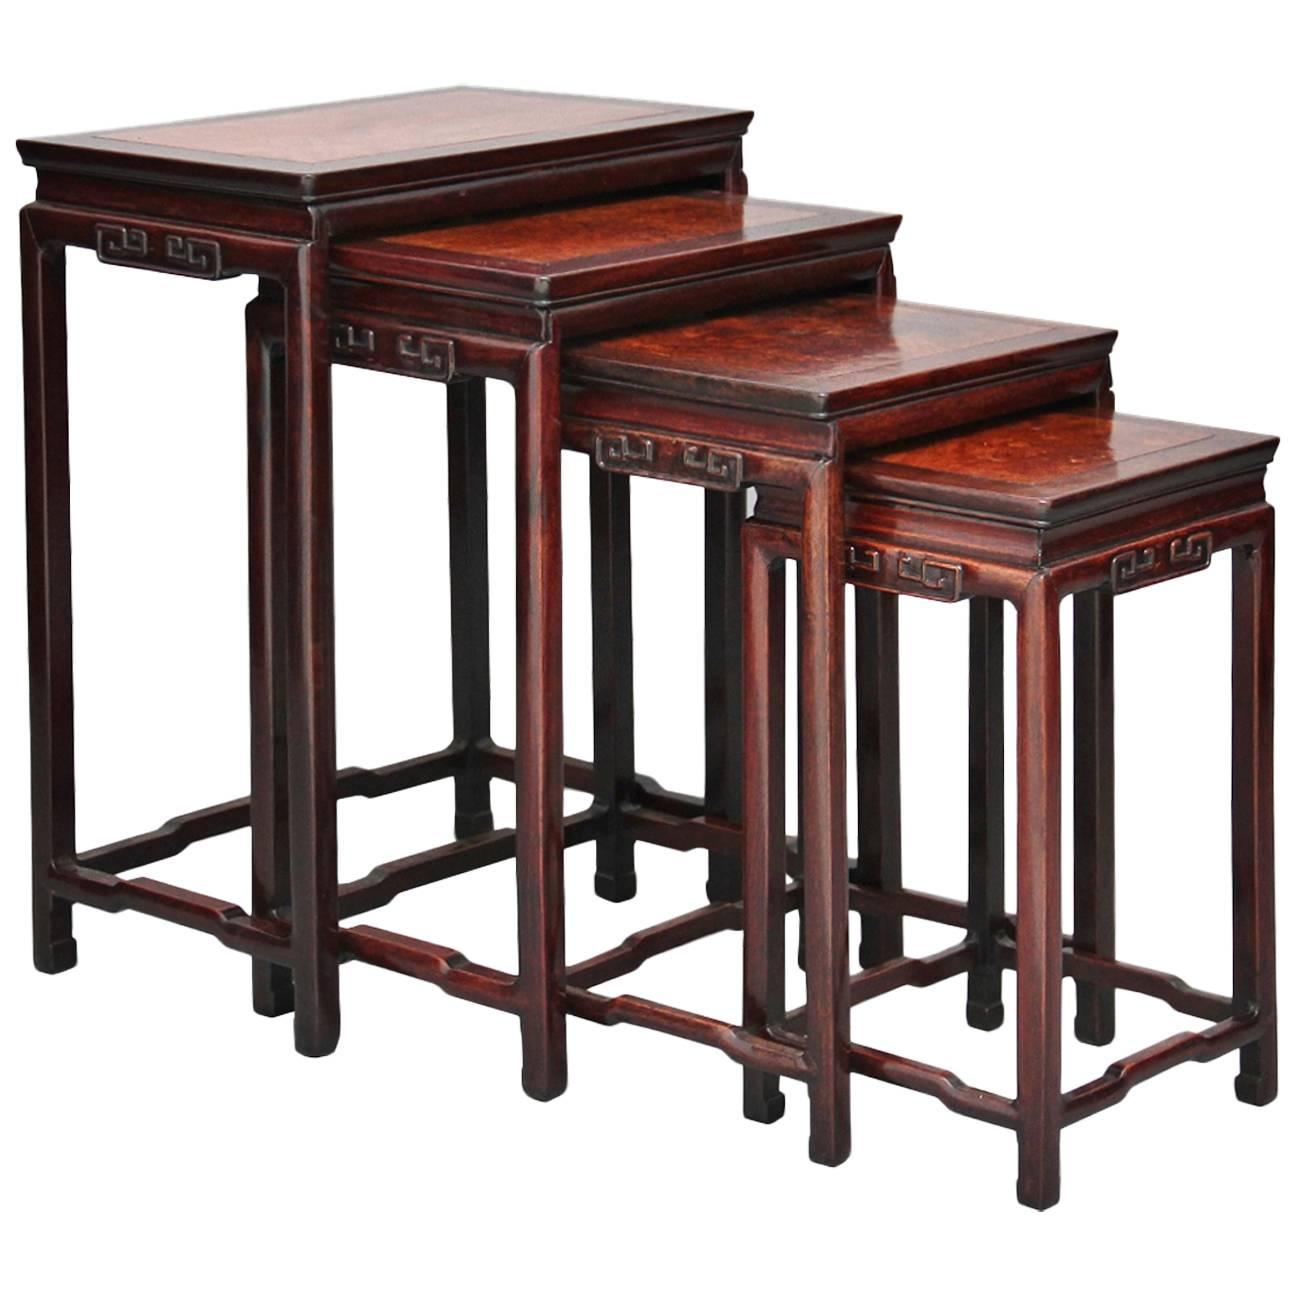 19th Century Chinese Rosewood Nest of Tables